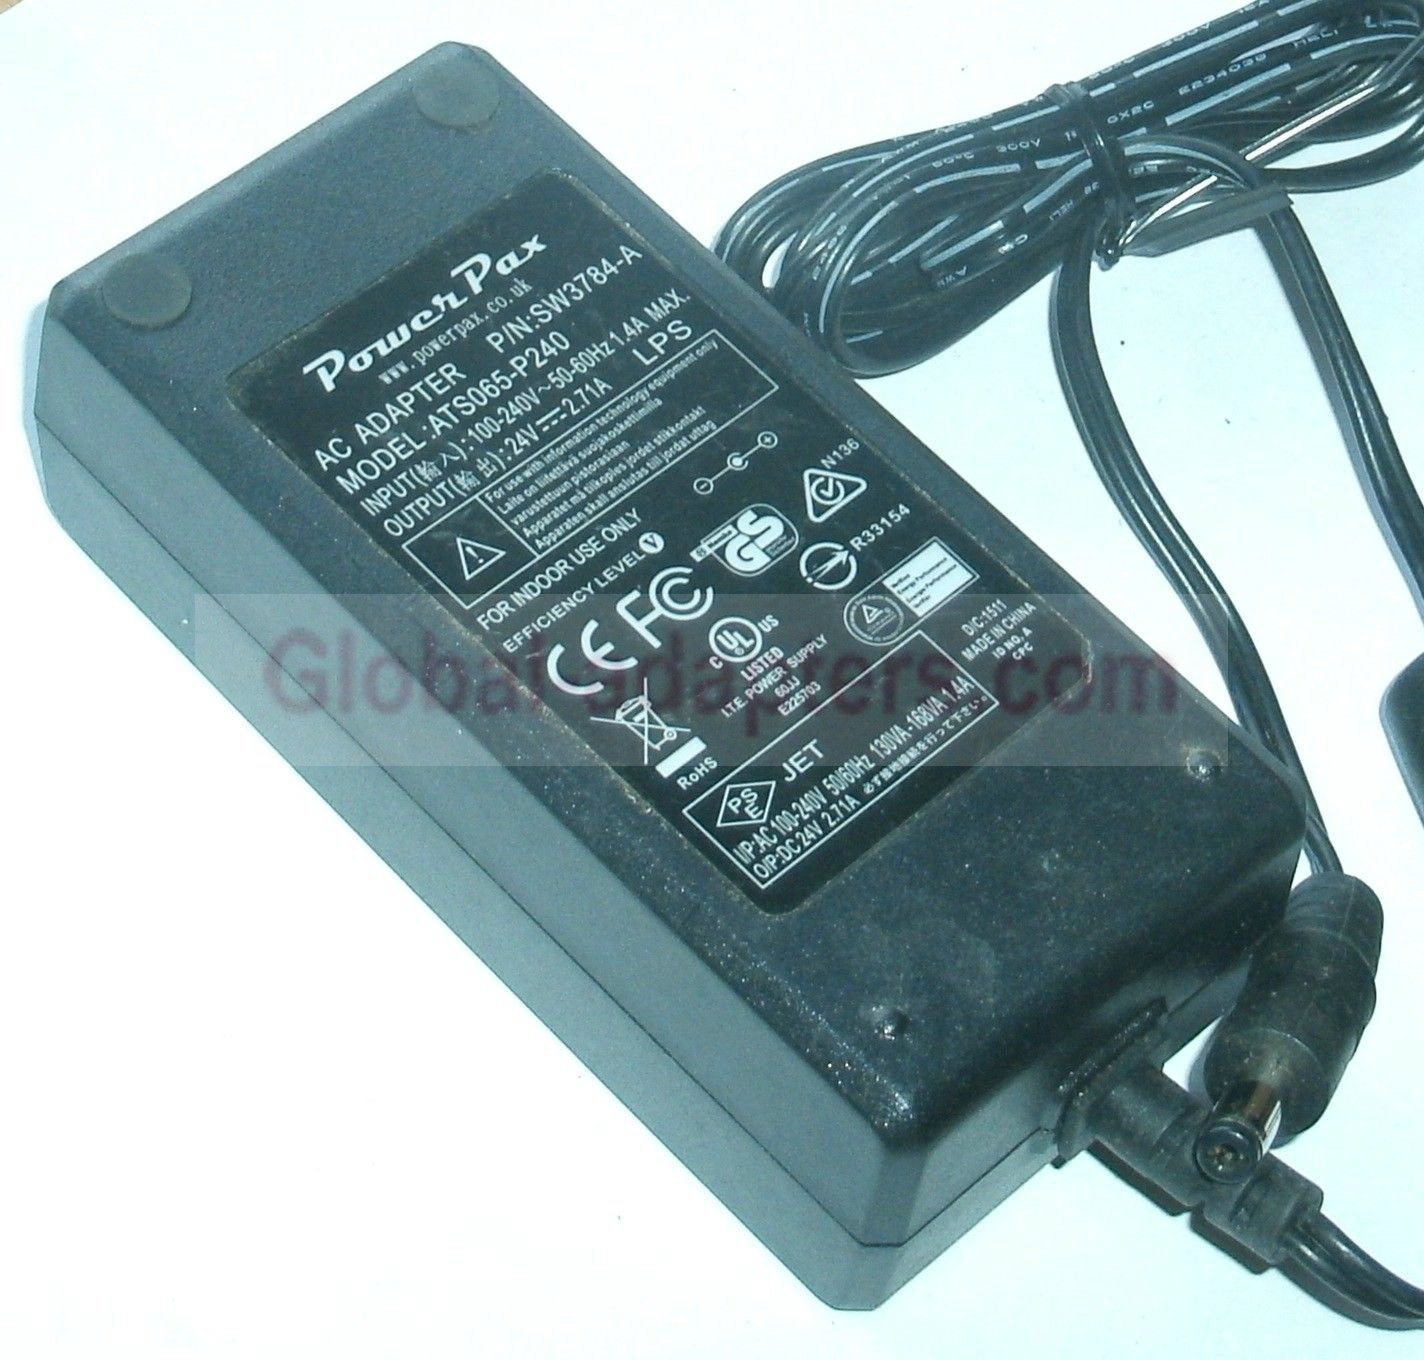 NEW 24V 2.71A POWER PAX ATS065-P240 SW3784-A AC ADAPTER